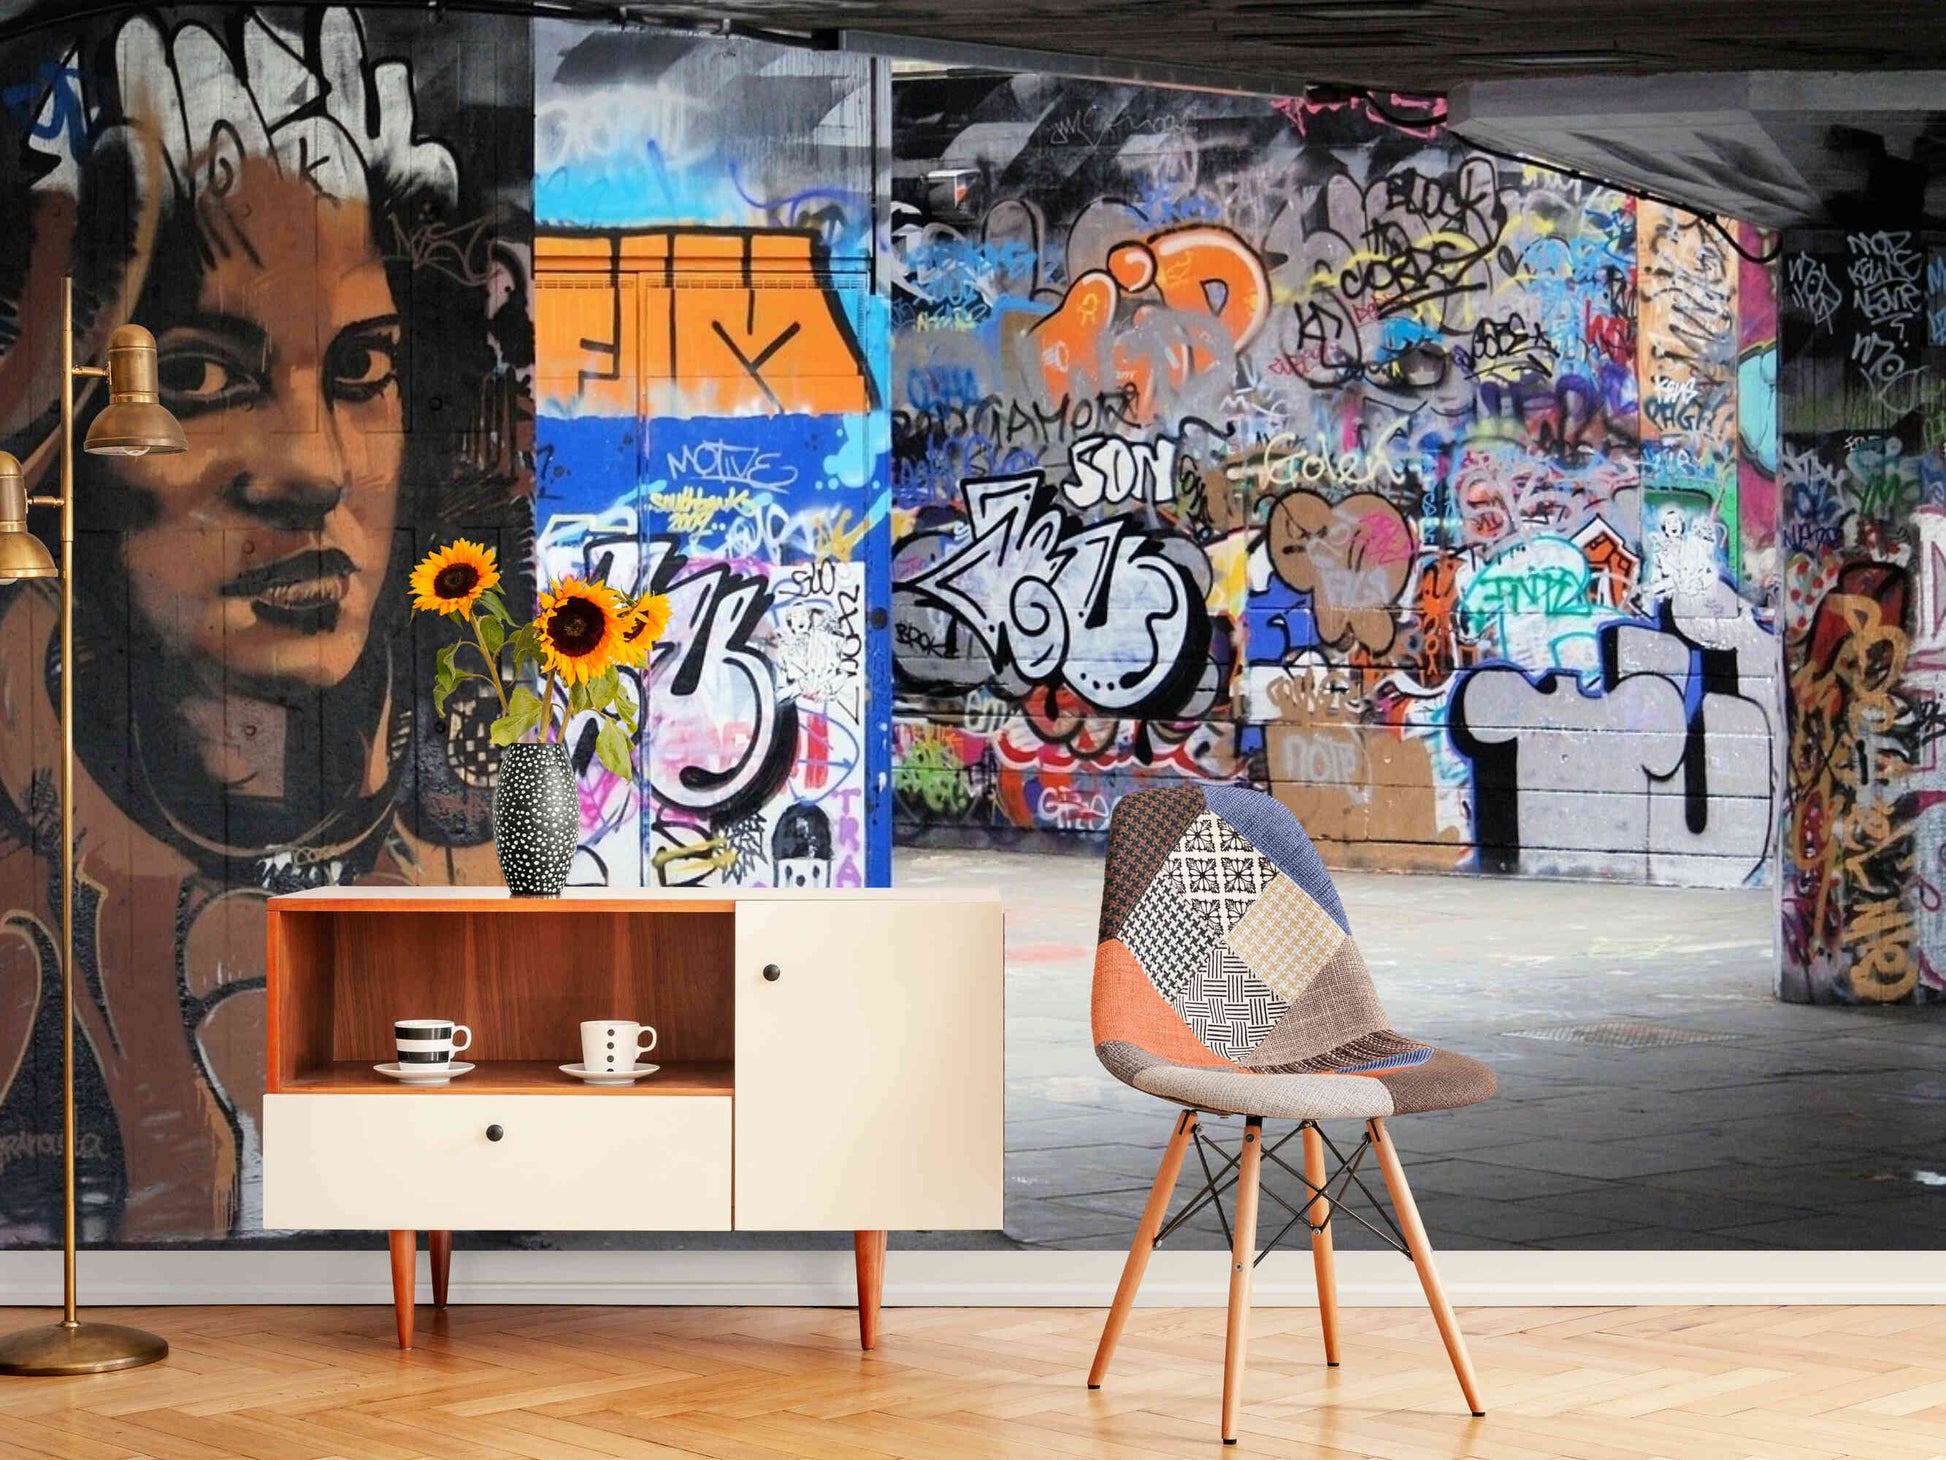 An explosion of color and creativity with this cool street graffiti art mural, igniting walls with urban flair.